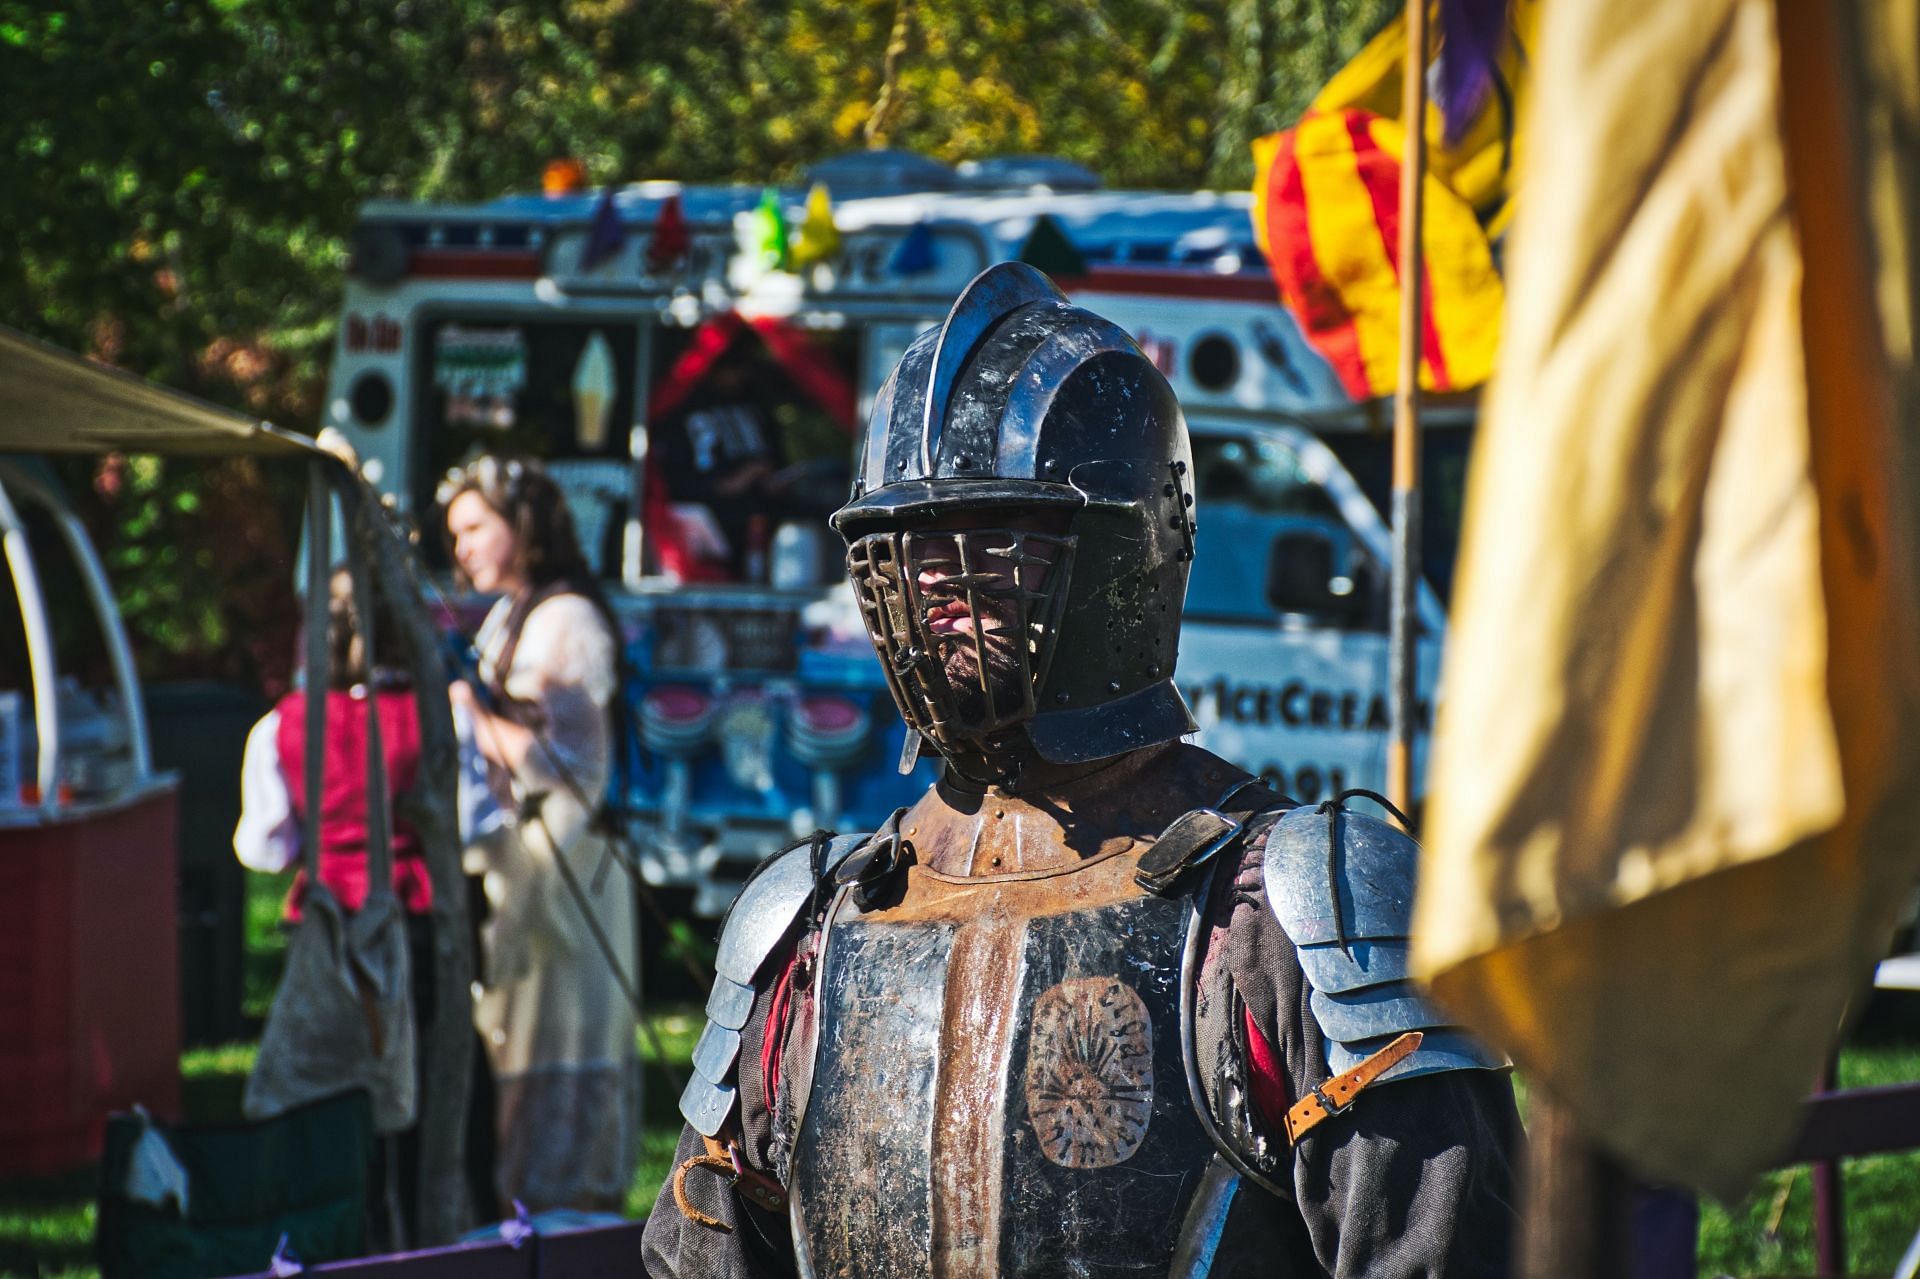 Knights started training at seven years of age. (Image via Pexels/Kevin Bidwell)